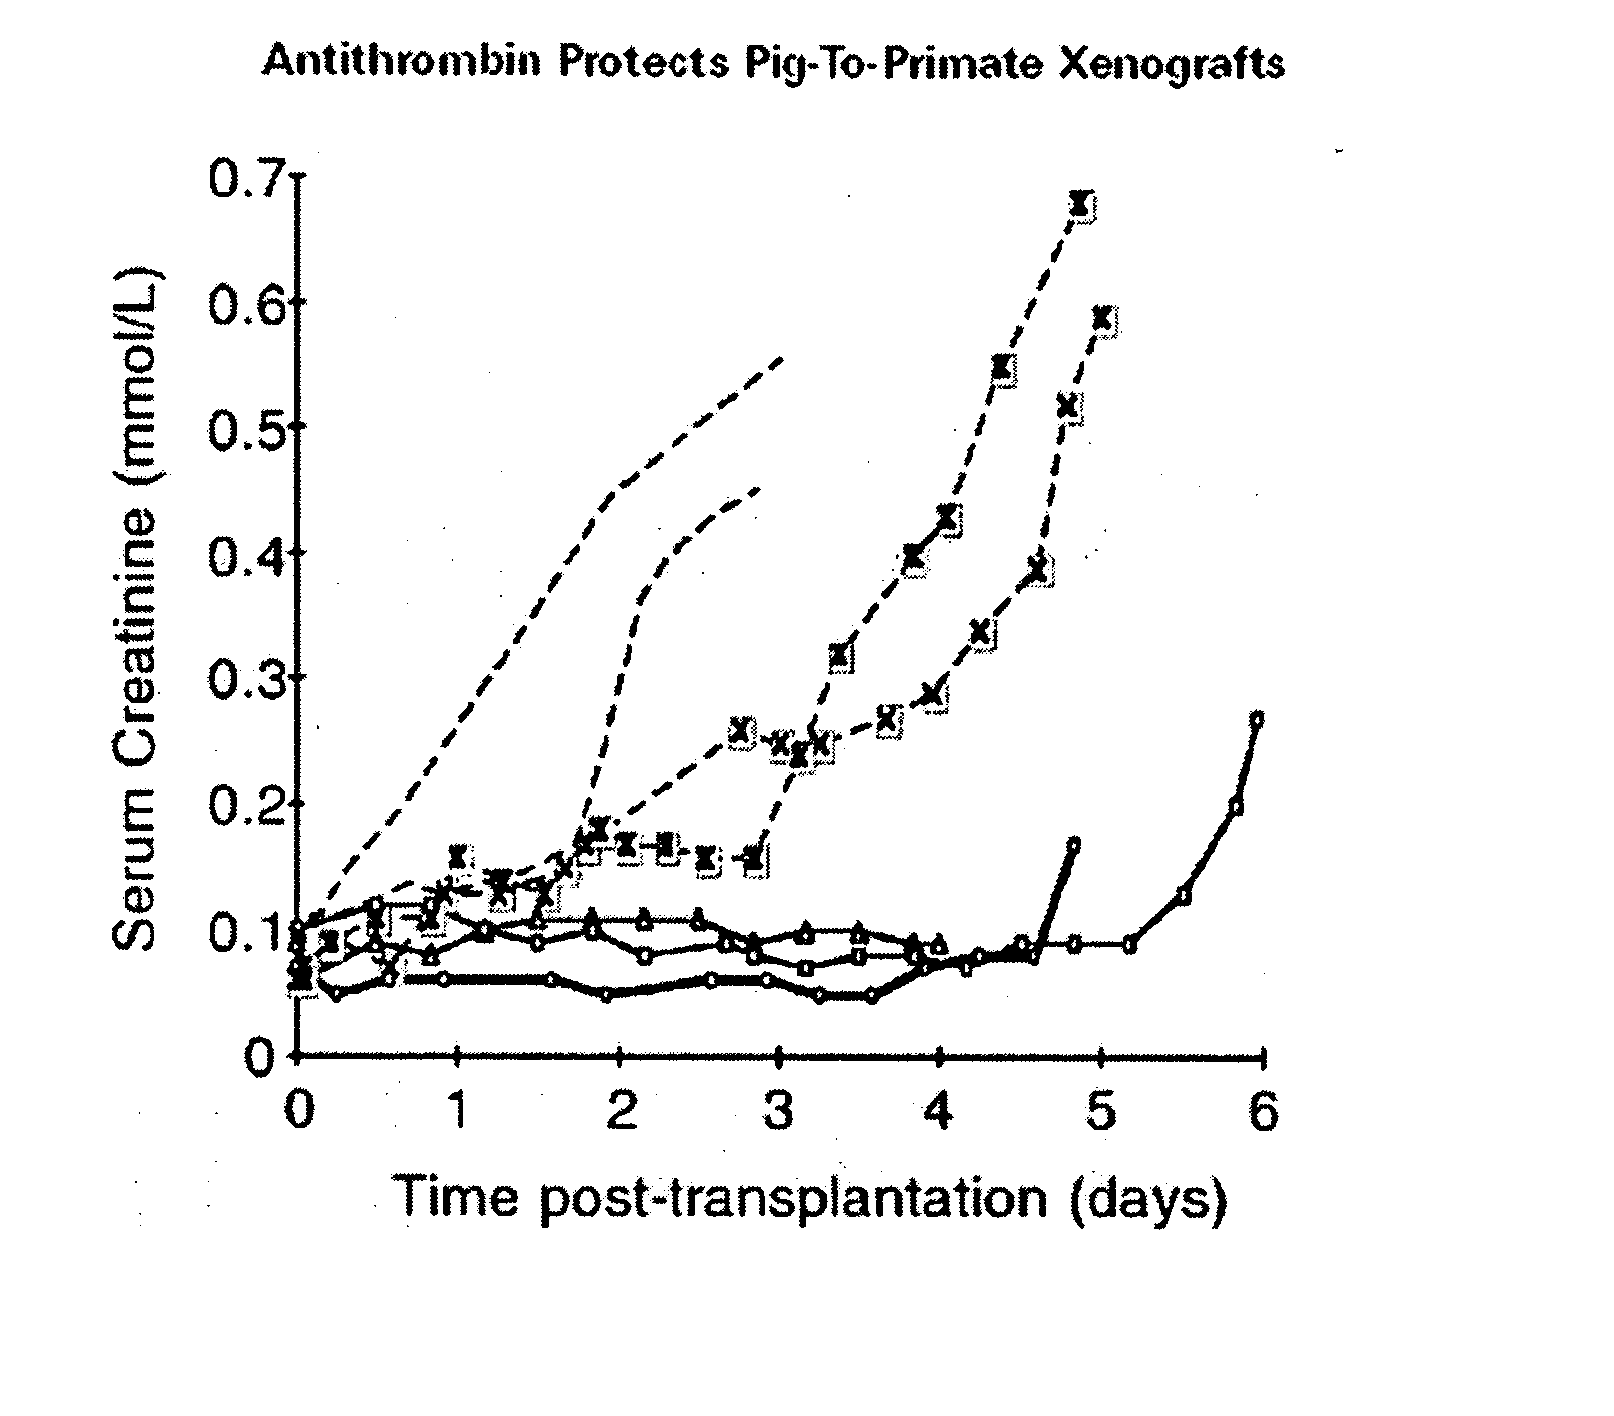 Methods of reducing the incidence of rejection in tissue transplantation through the use of recombinant human antithrombin